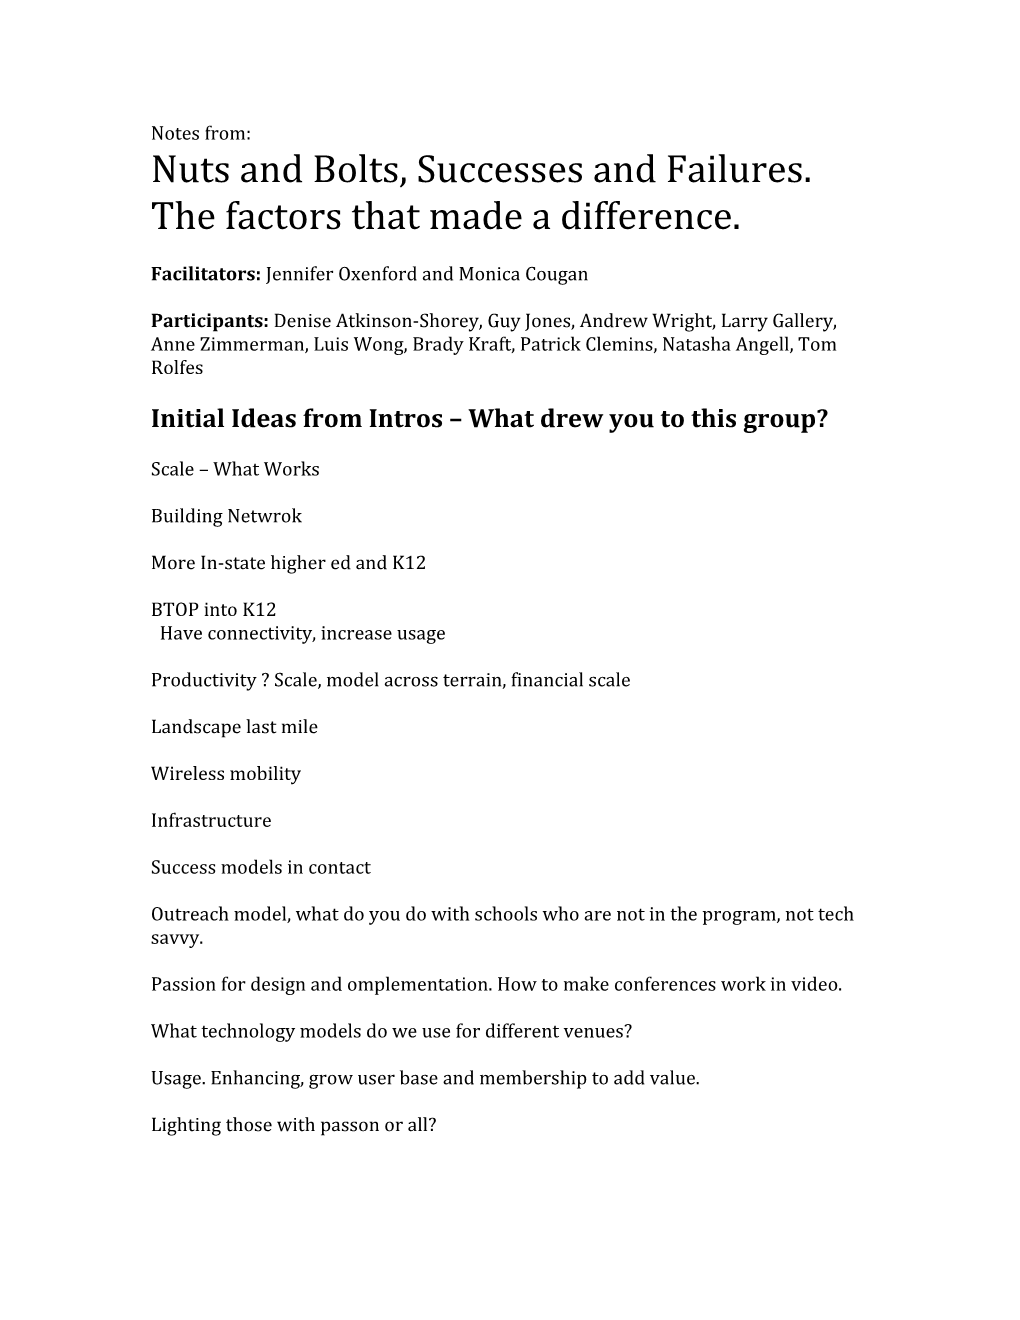 Nuts and Bolts, Successes and Failures. the Factors That Made a Difference